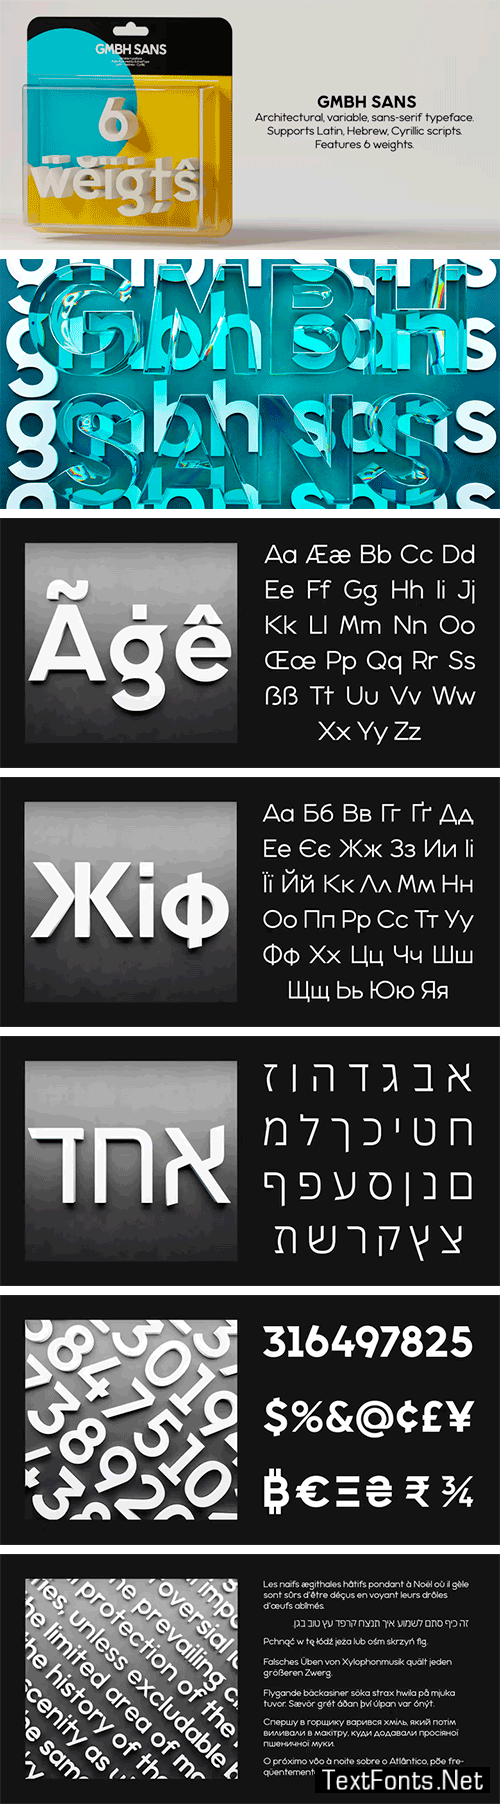 fonts with glyphs free download